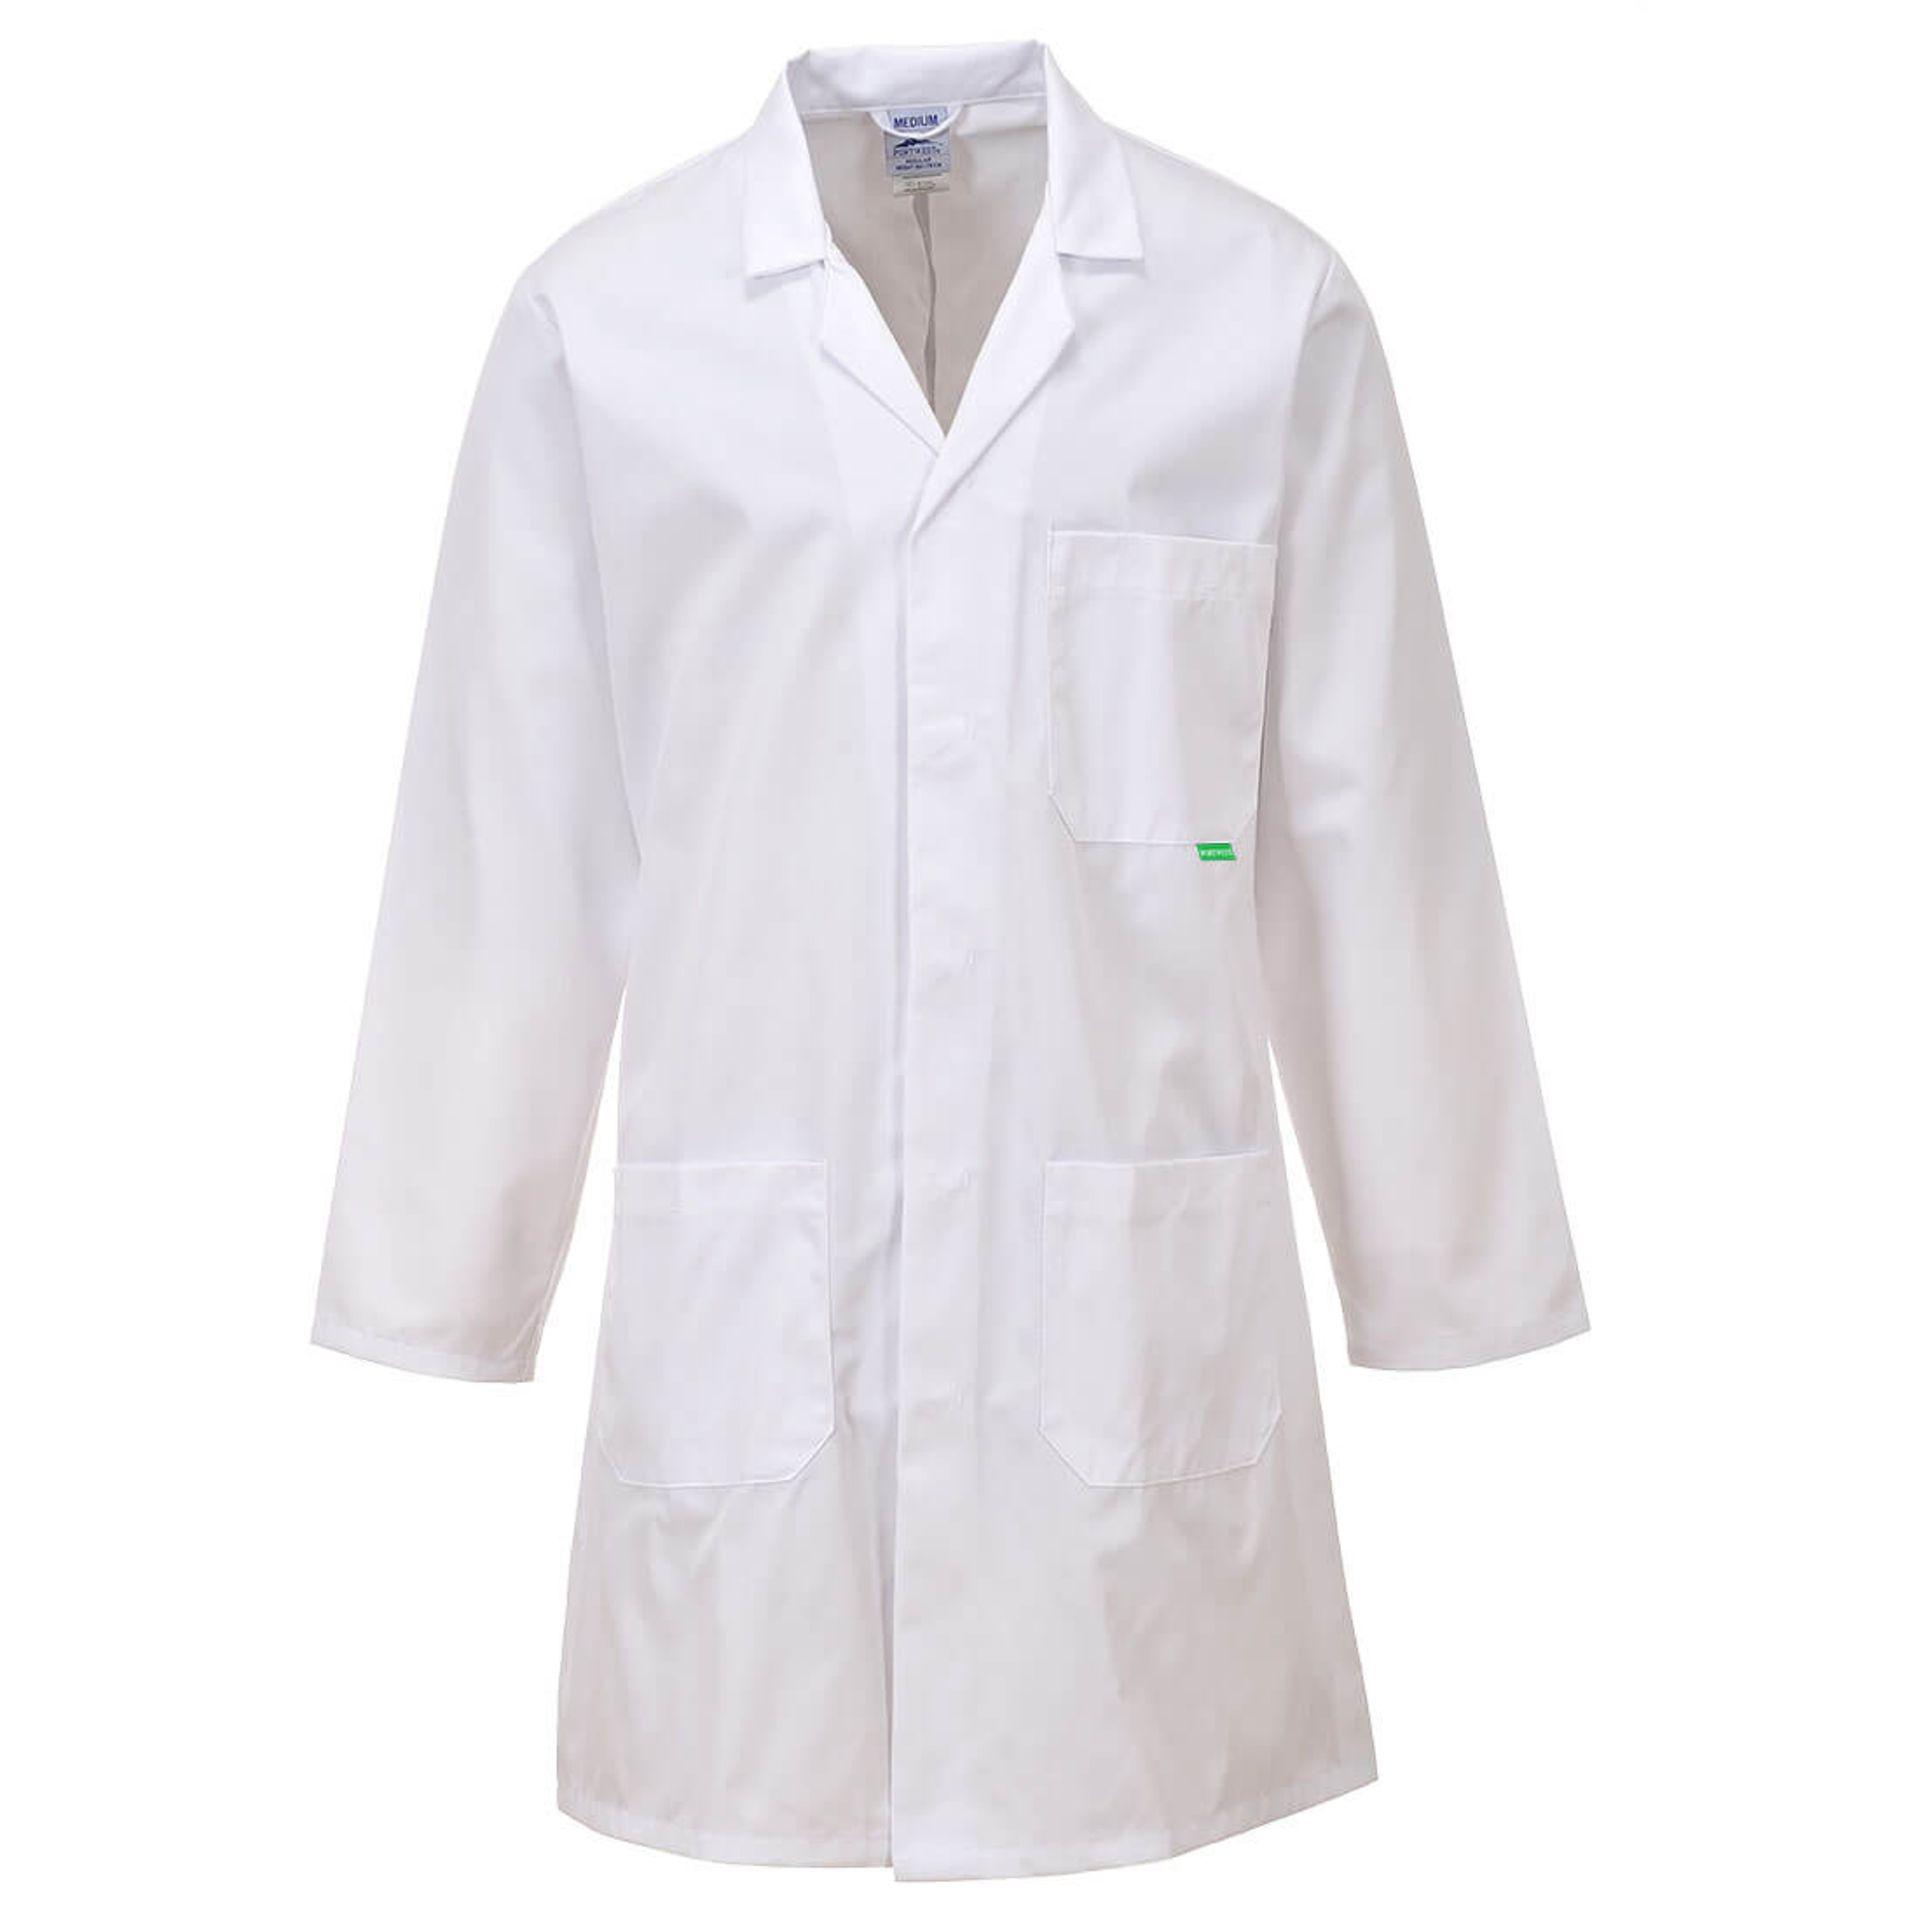 5x BRAND NEW PORTWEST Anti-Microbial Lab Coat WHITE SIZE M. RRP £20 Each. (PW). (M852WHRM). Superior